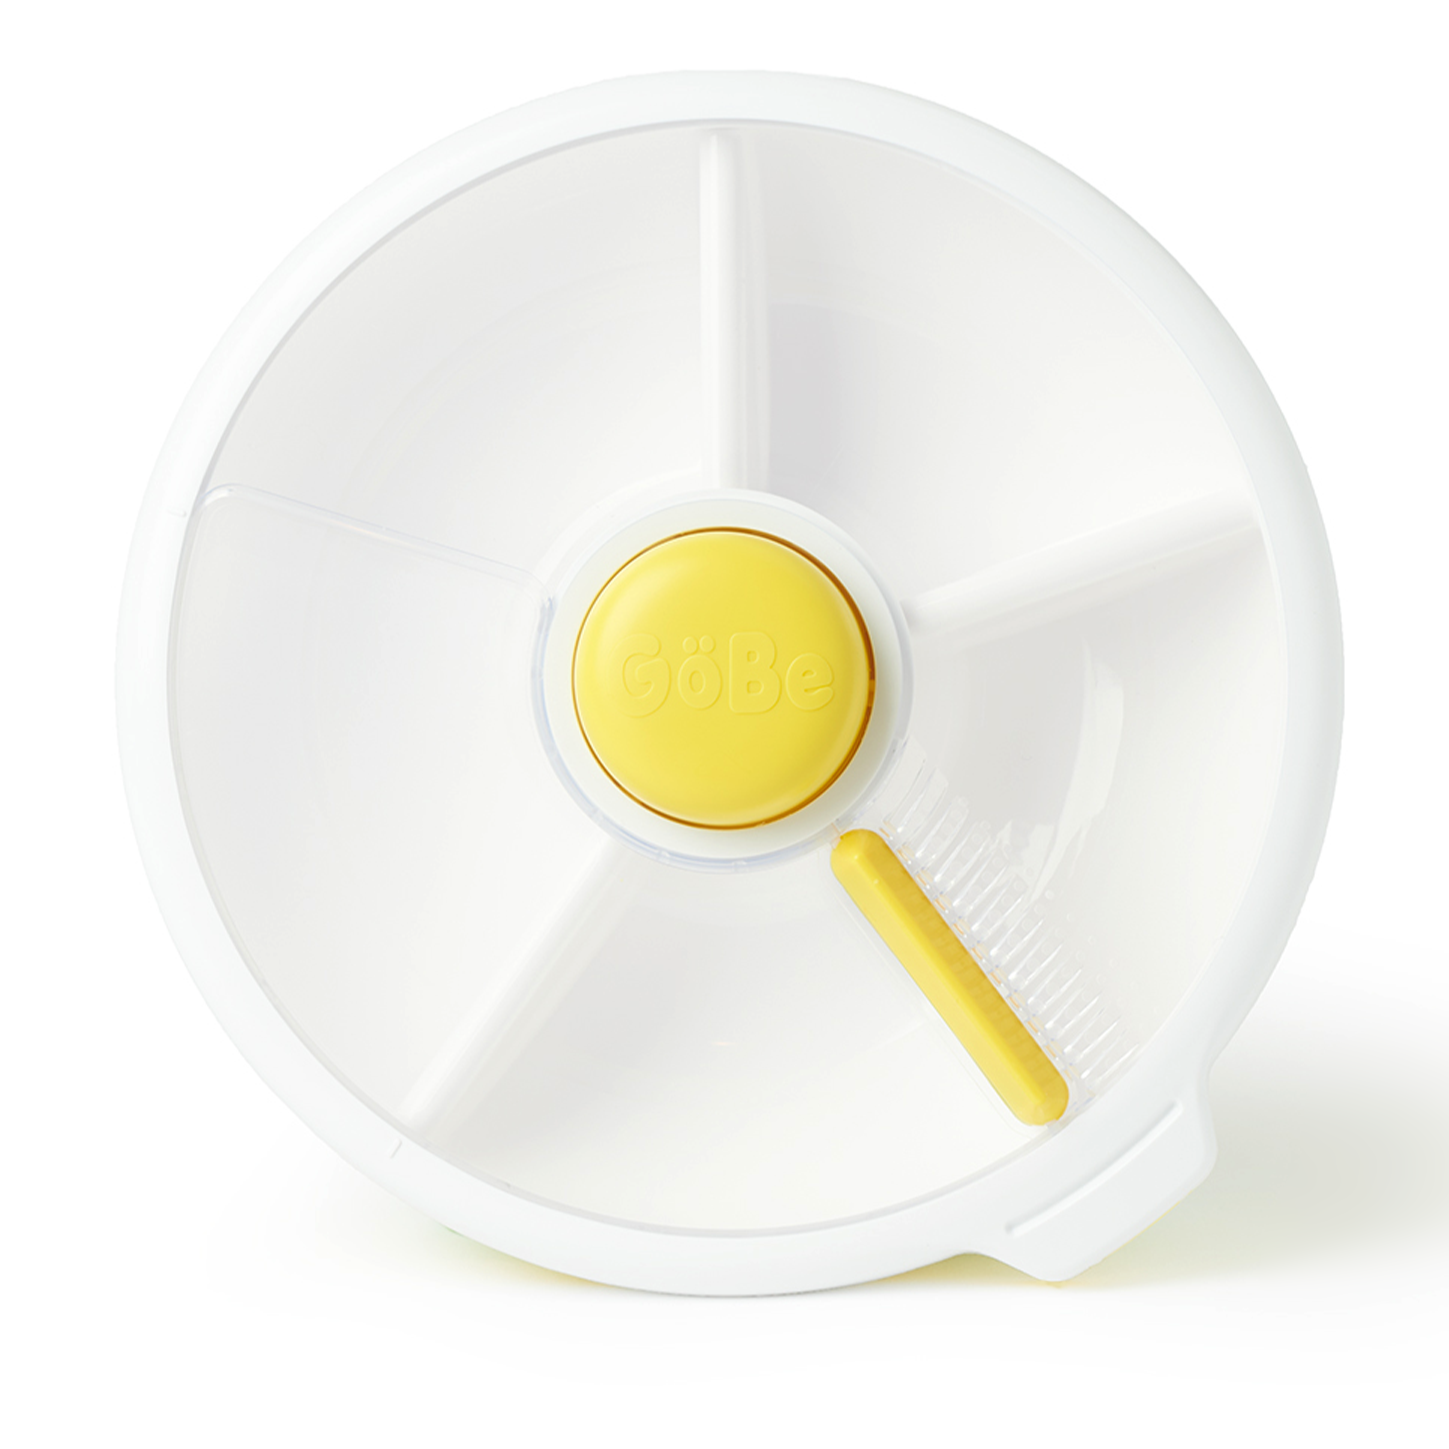 Gobe snack spinner lunch box in lemon yellow and white.